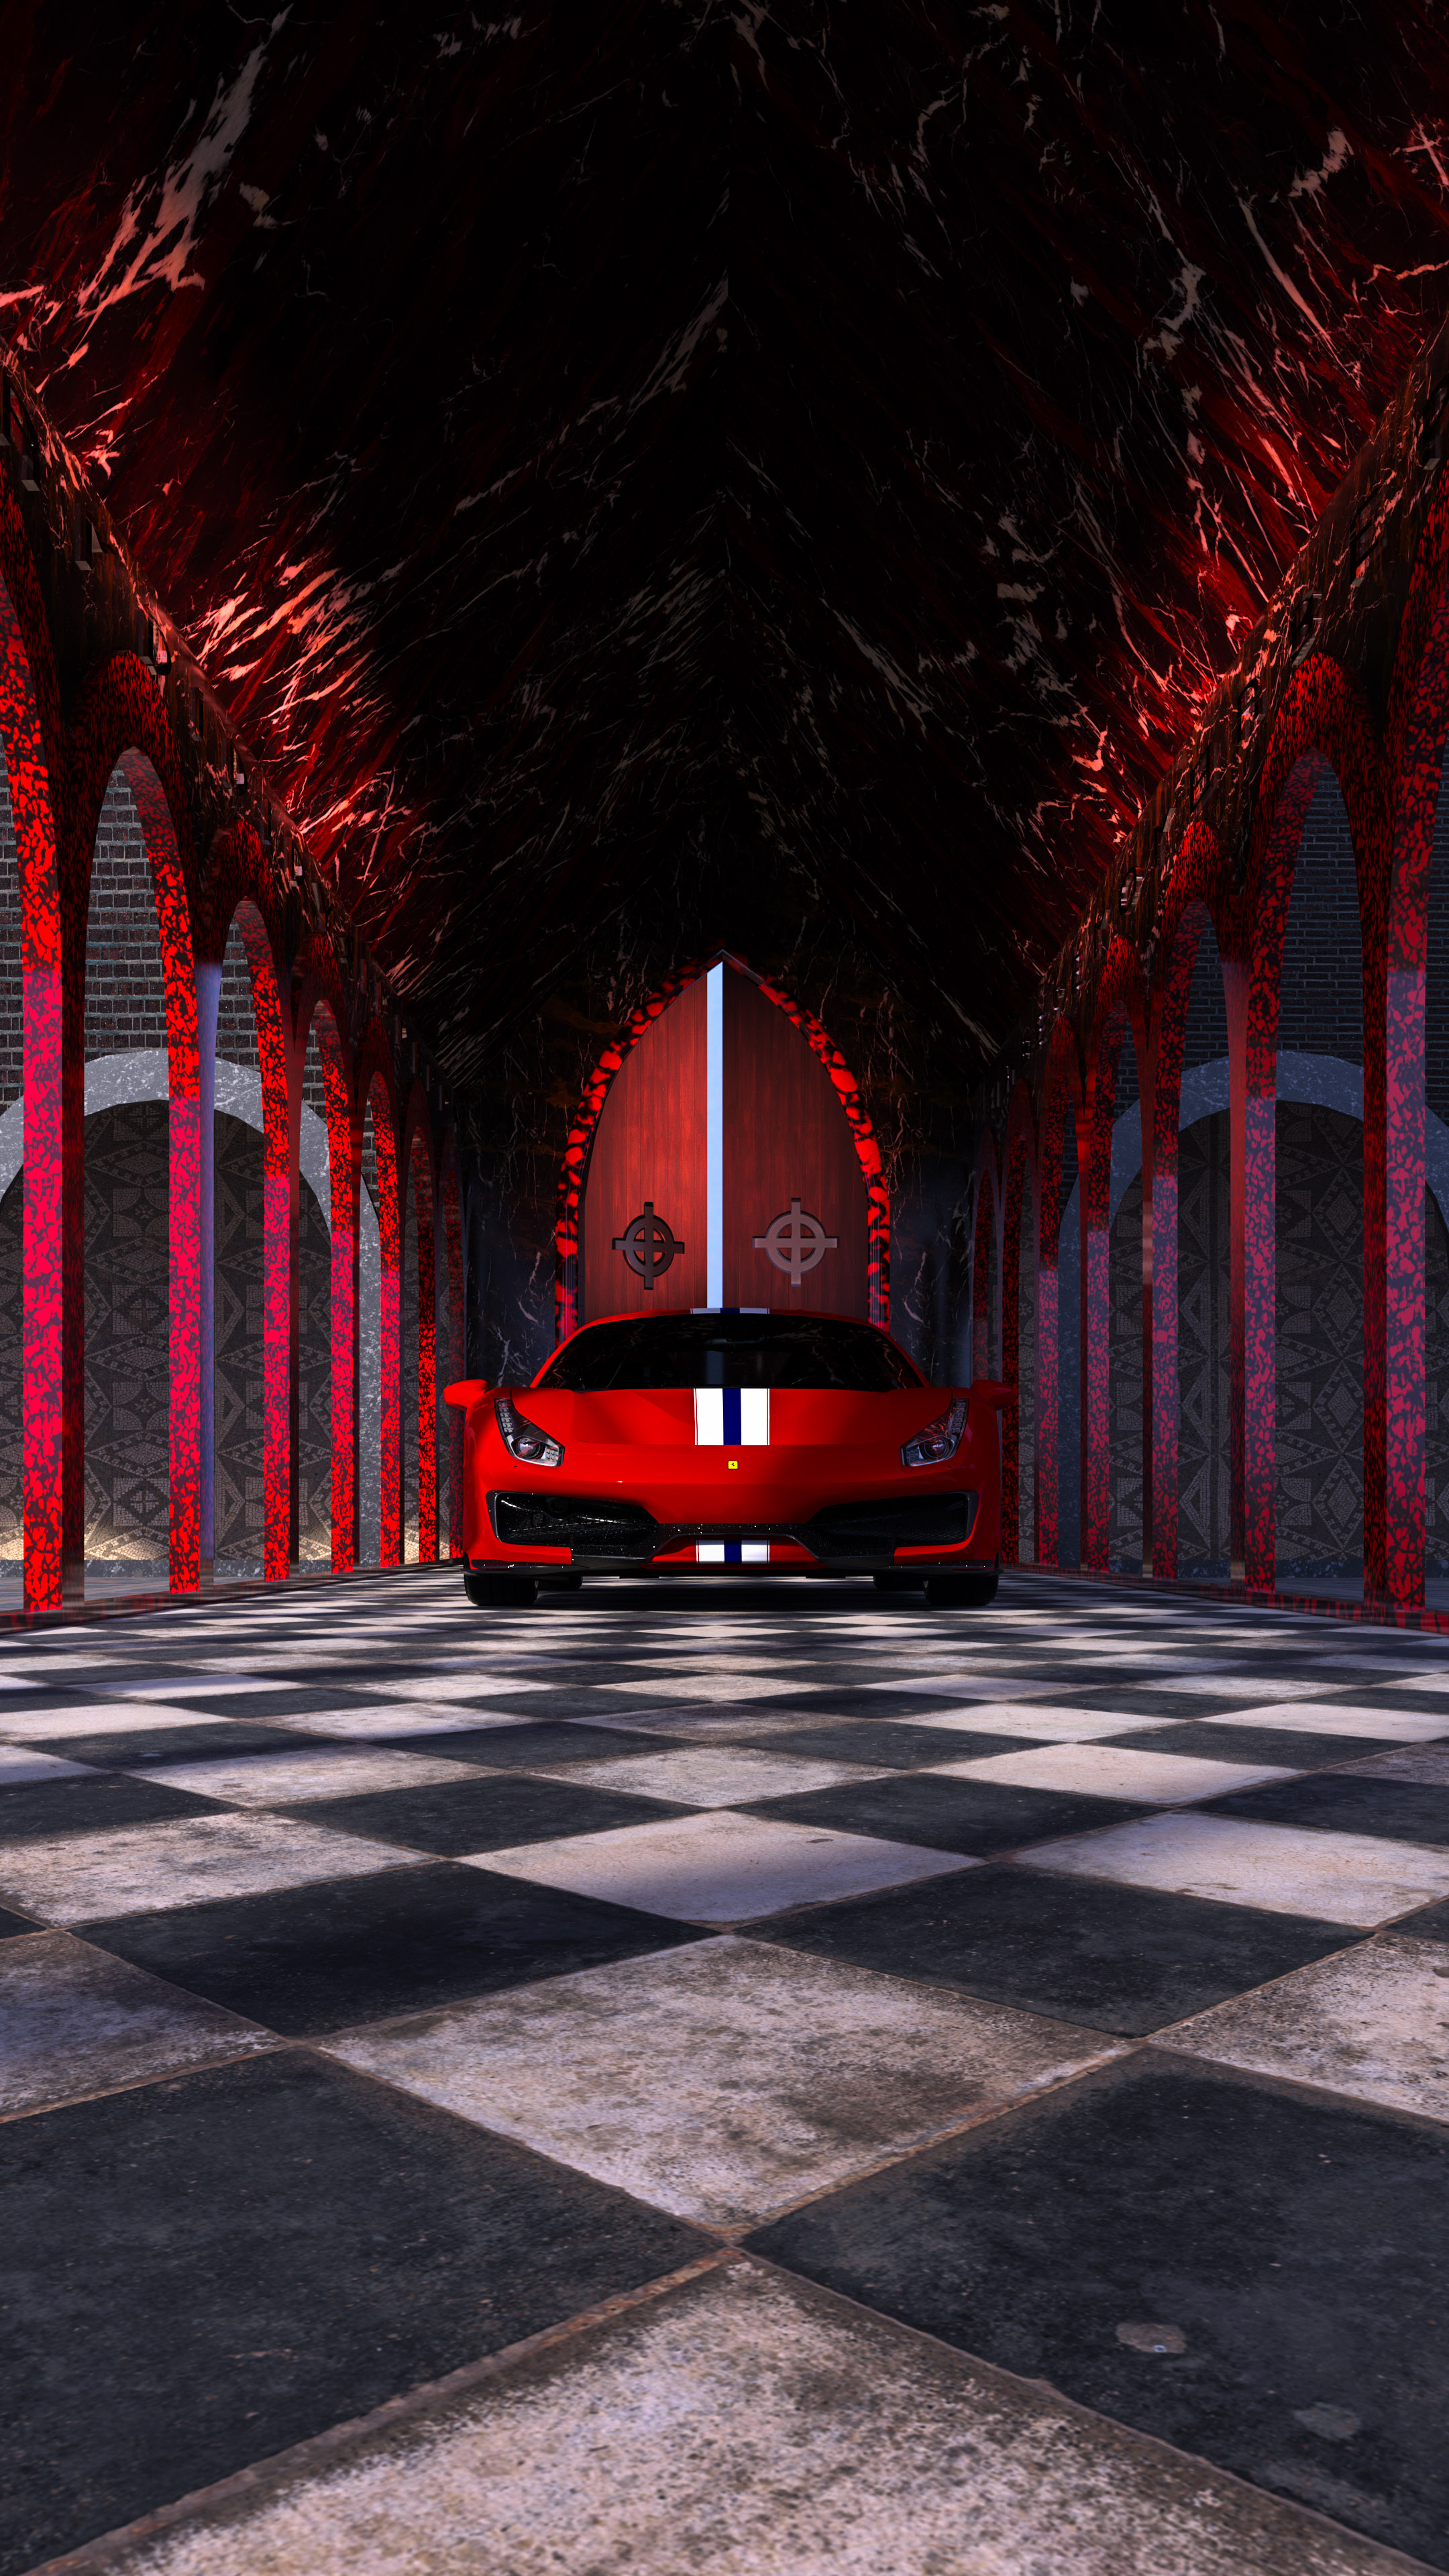 Embark on a visual journey with the iPhone car wallpaper, featuring the Ferrari 488, providing an immersive experience for enthusiasts seeking elegance and power.